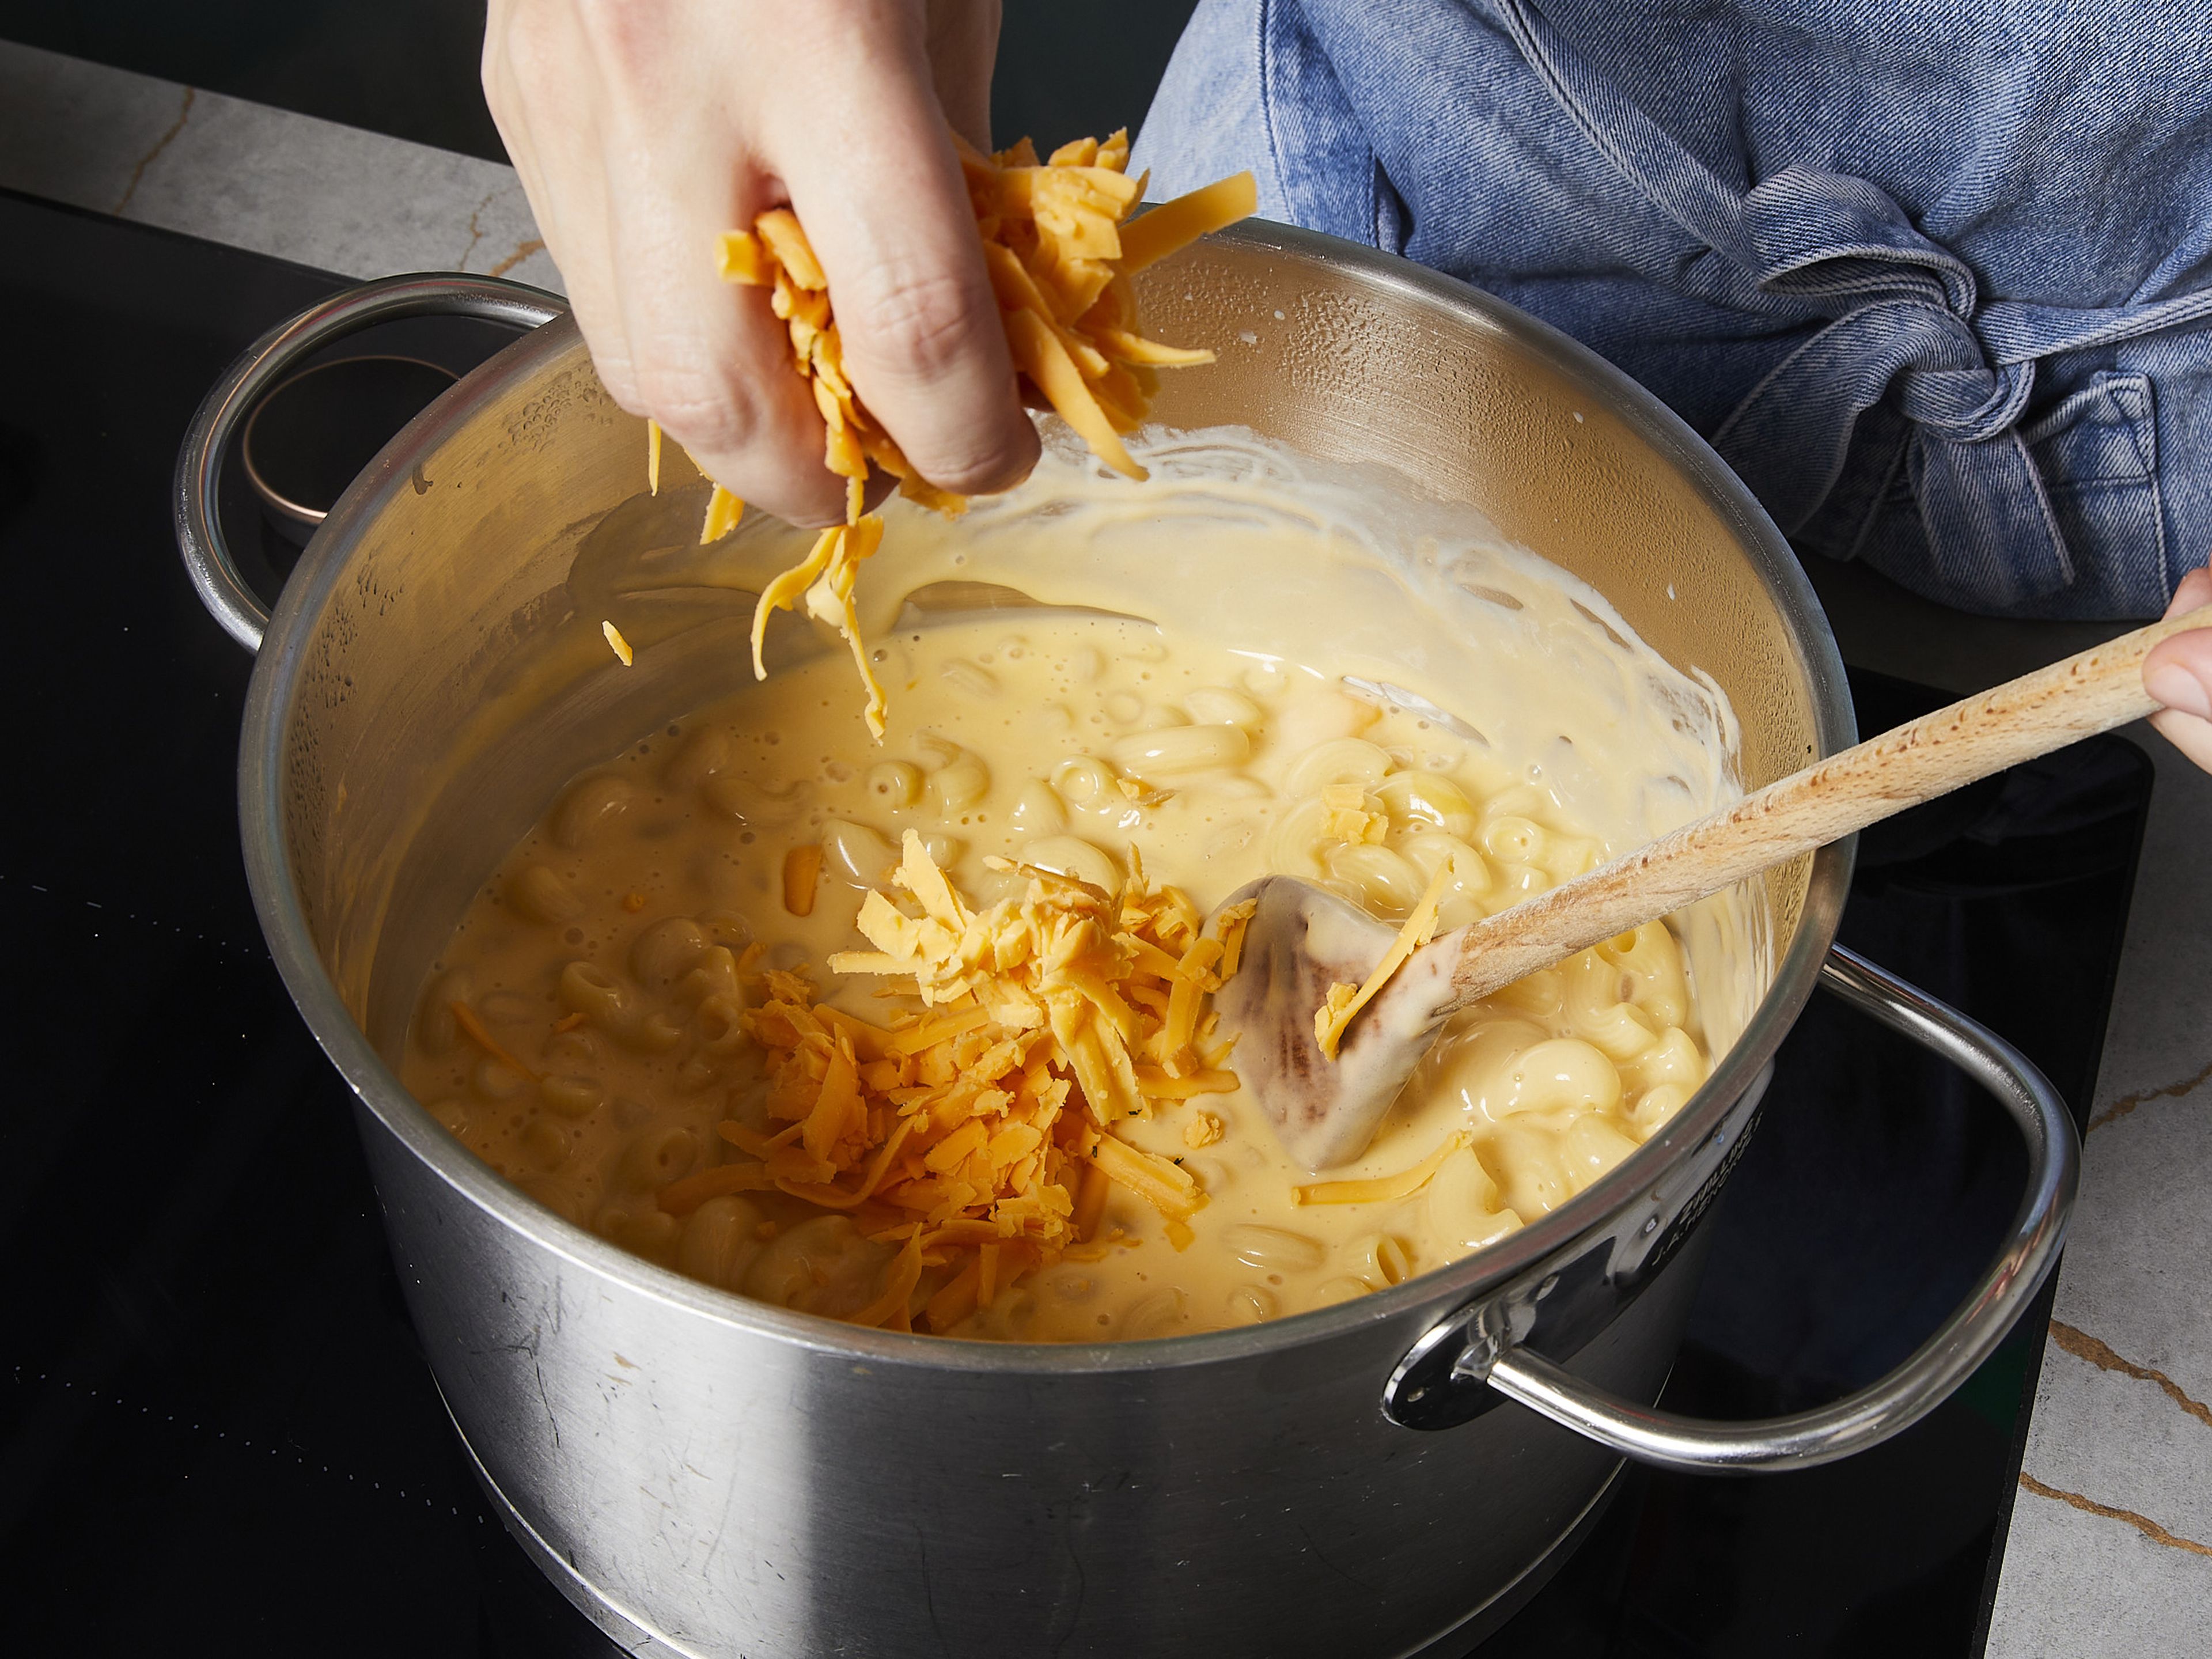 As soon as it starts to simmer, add the pasta and a good pinch of salt. Cook for approx. 8–10 min. or until the pasta is al dente. Stir occasionally. Then remove from the heat and mix in the cheddar cheese until it is completely melted and creamy. Season to taste with salt, pepper and nutmeg.